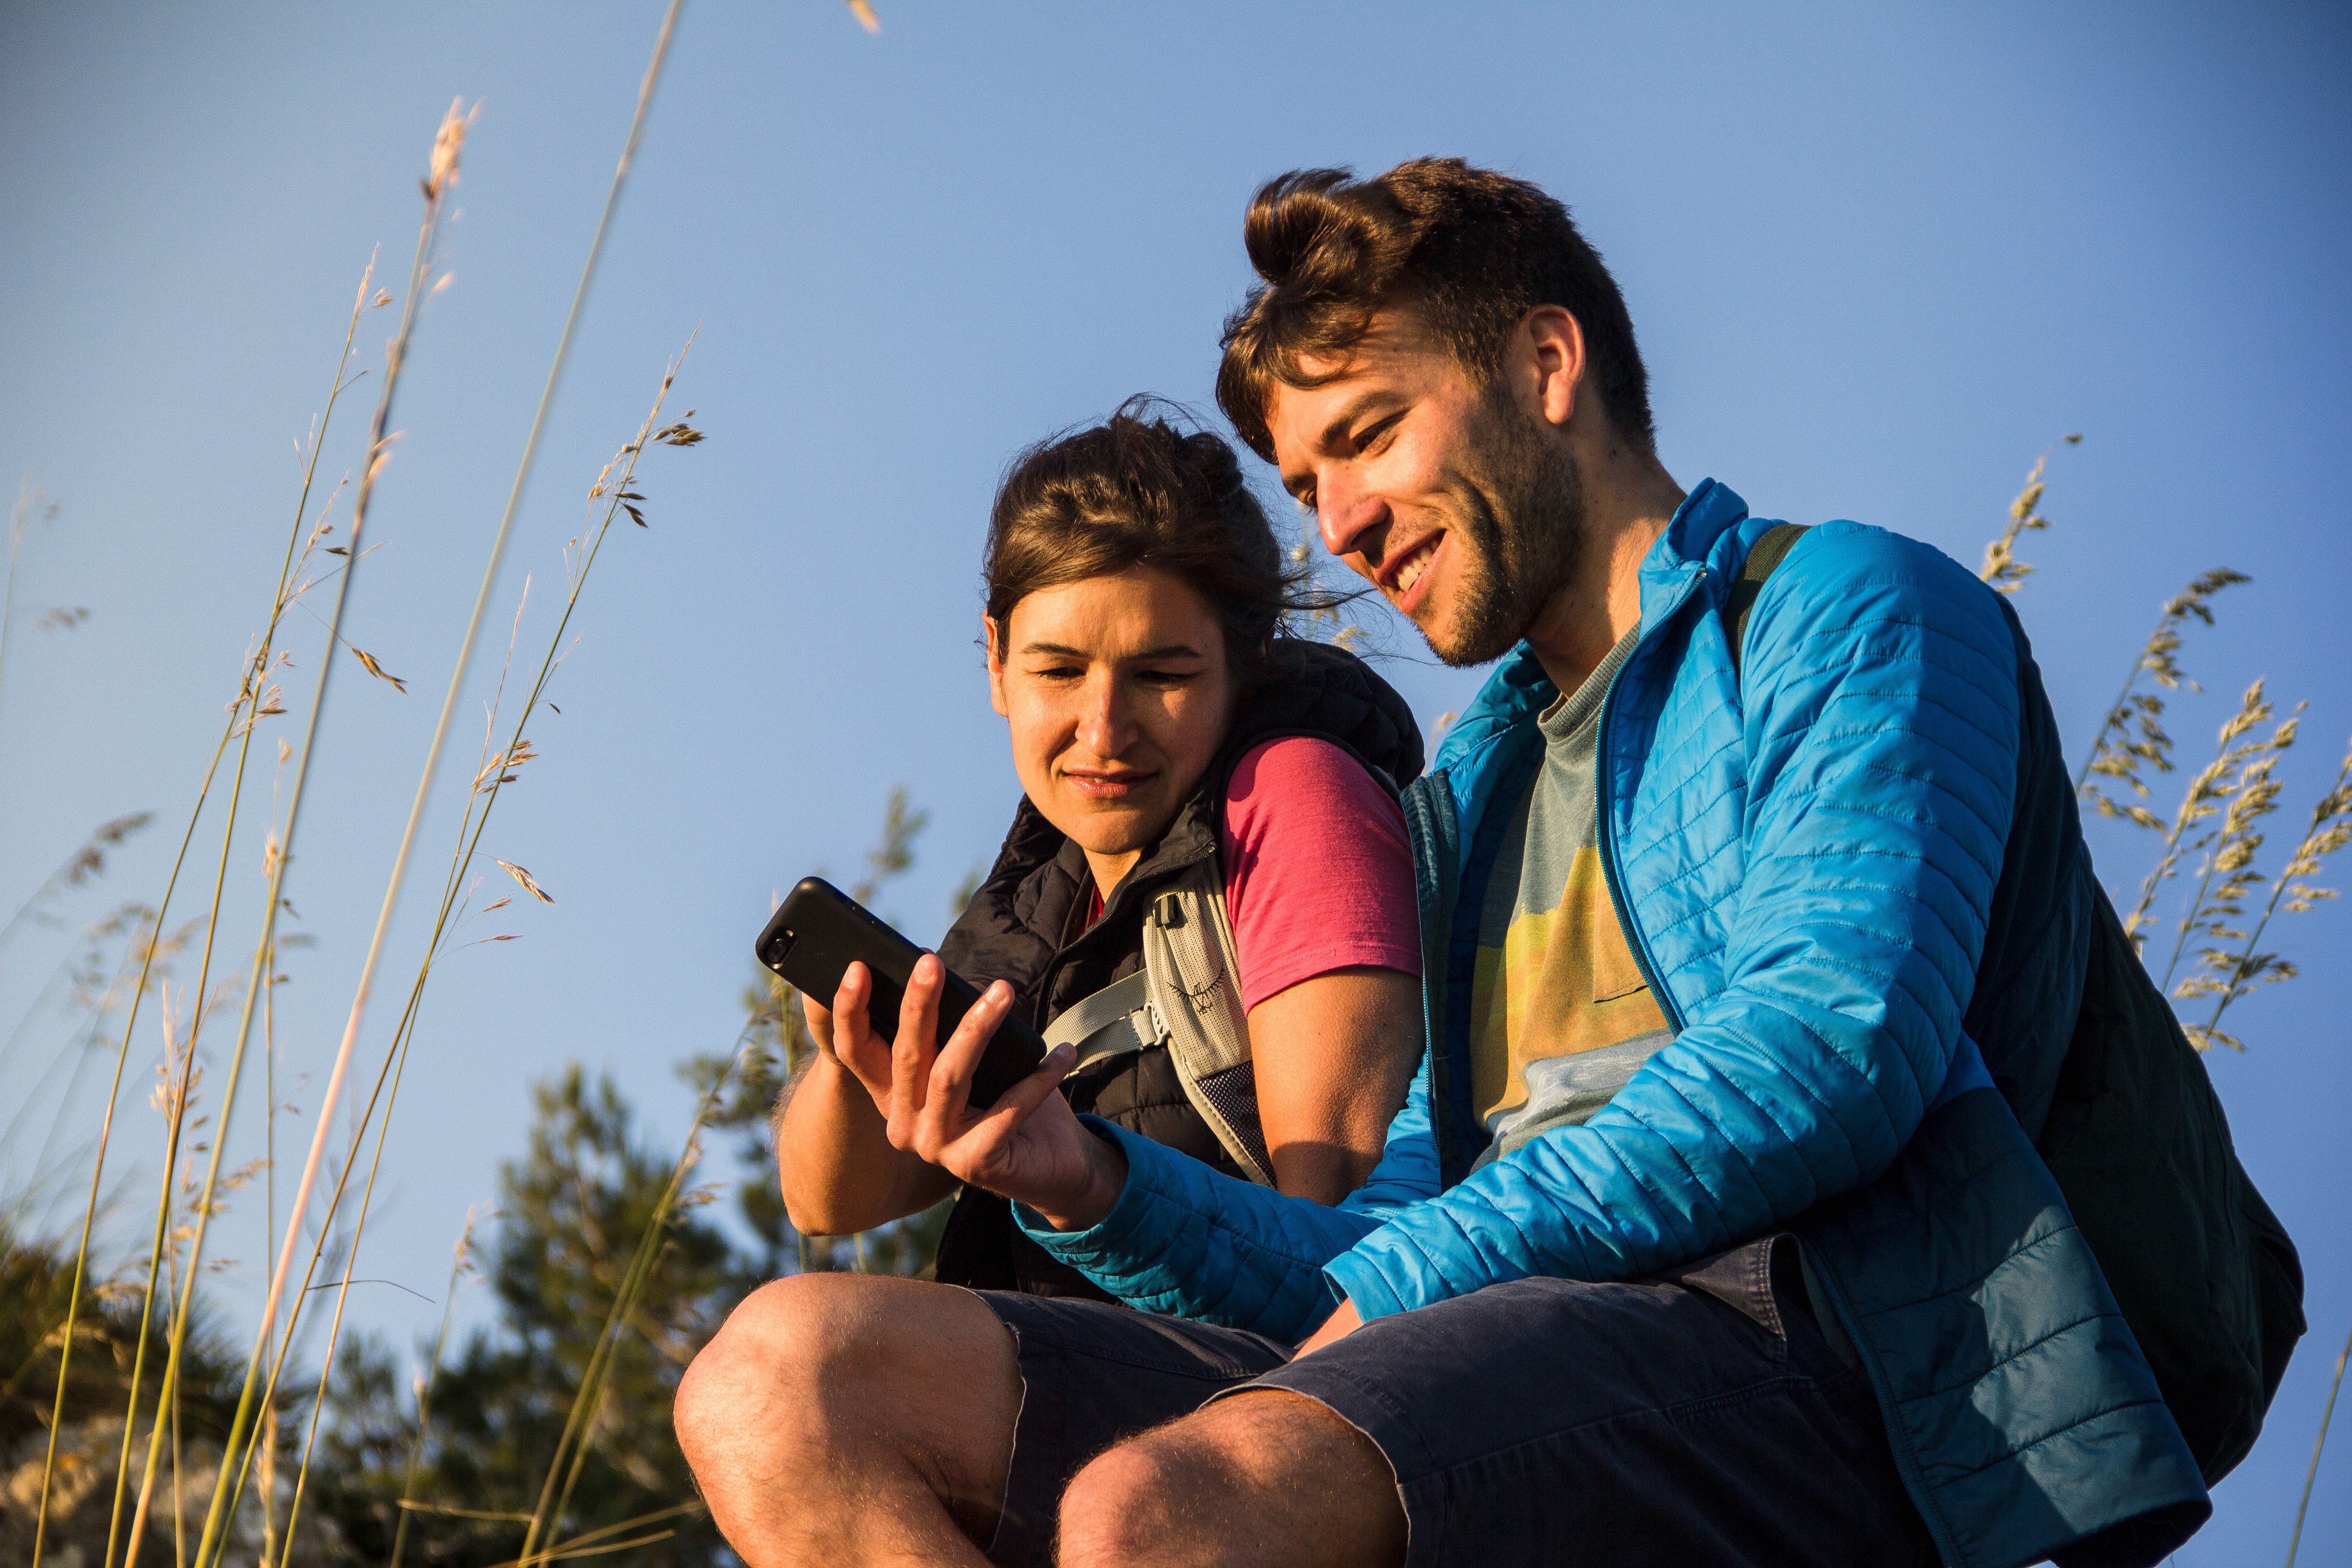 Three apps to help you get the most out of the outdoors: Guidify, Fatmap and komoot. Photo: komoot